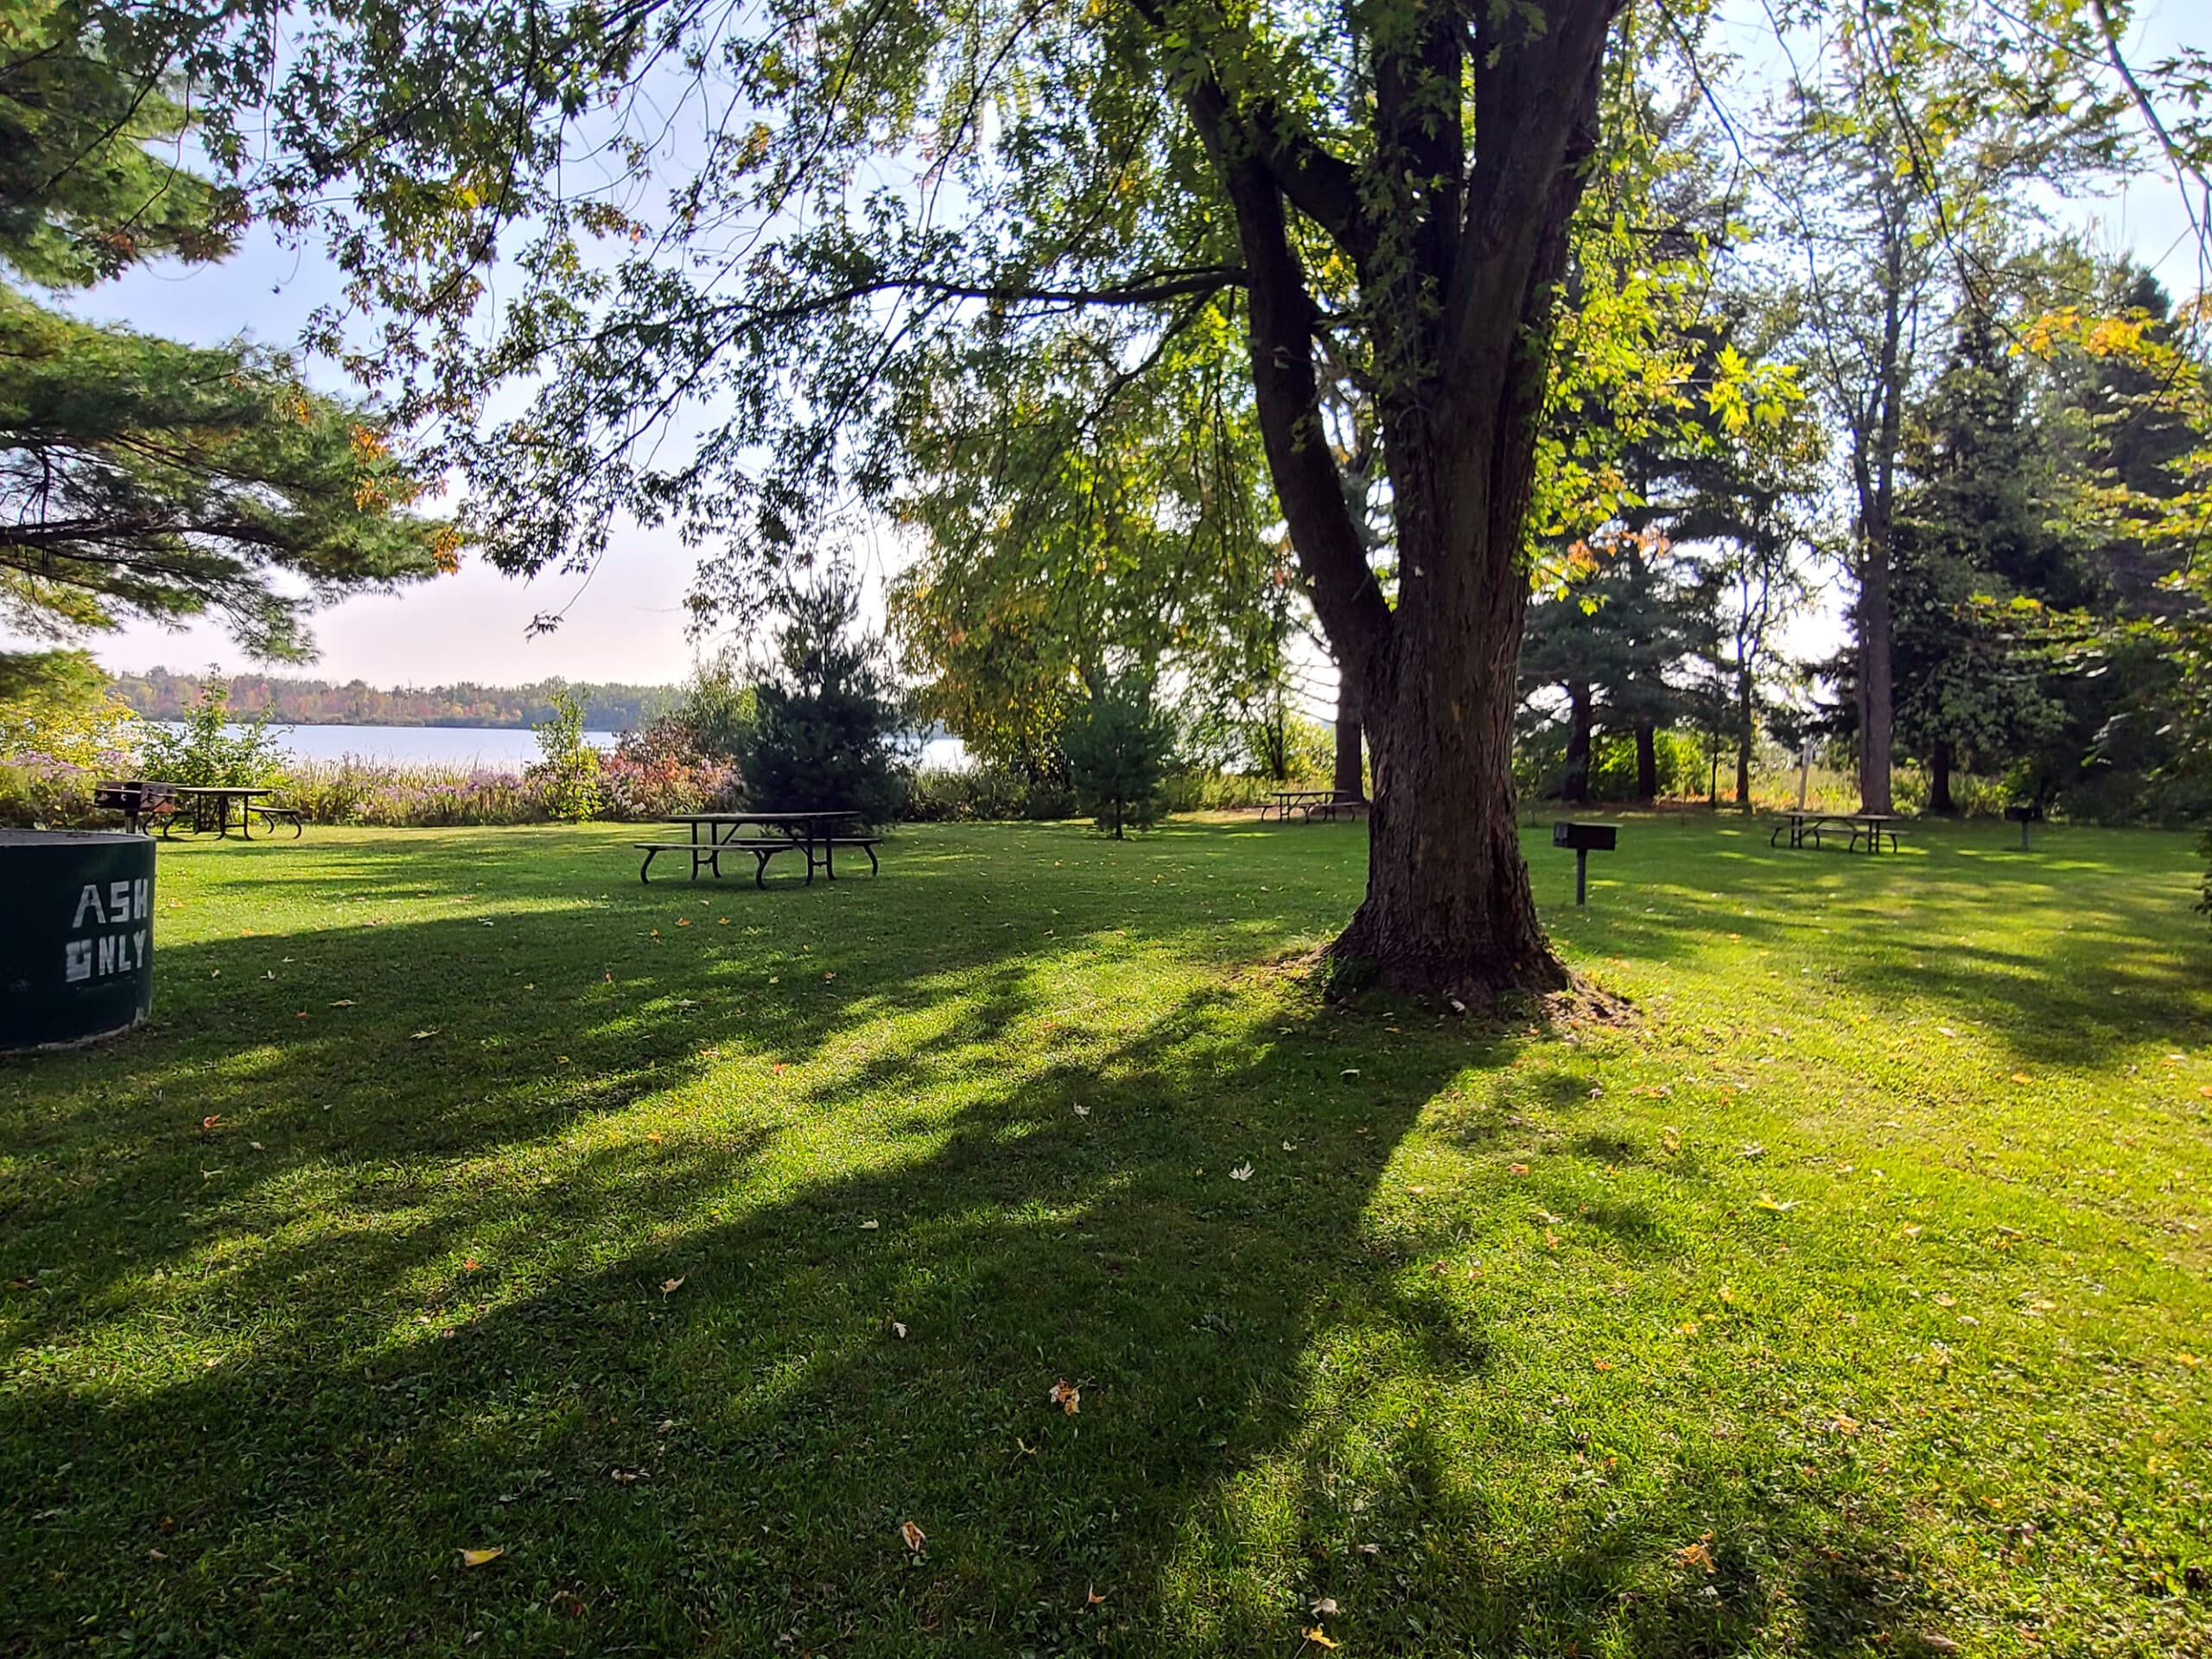 A grassy area with the Rideau River in the background.  There are picnic tables and grills visible.